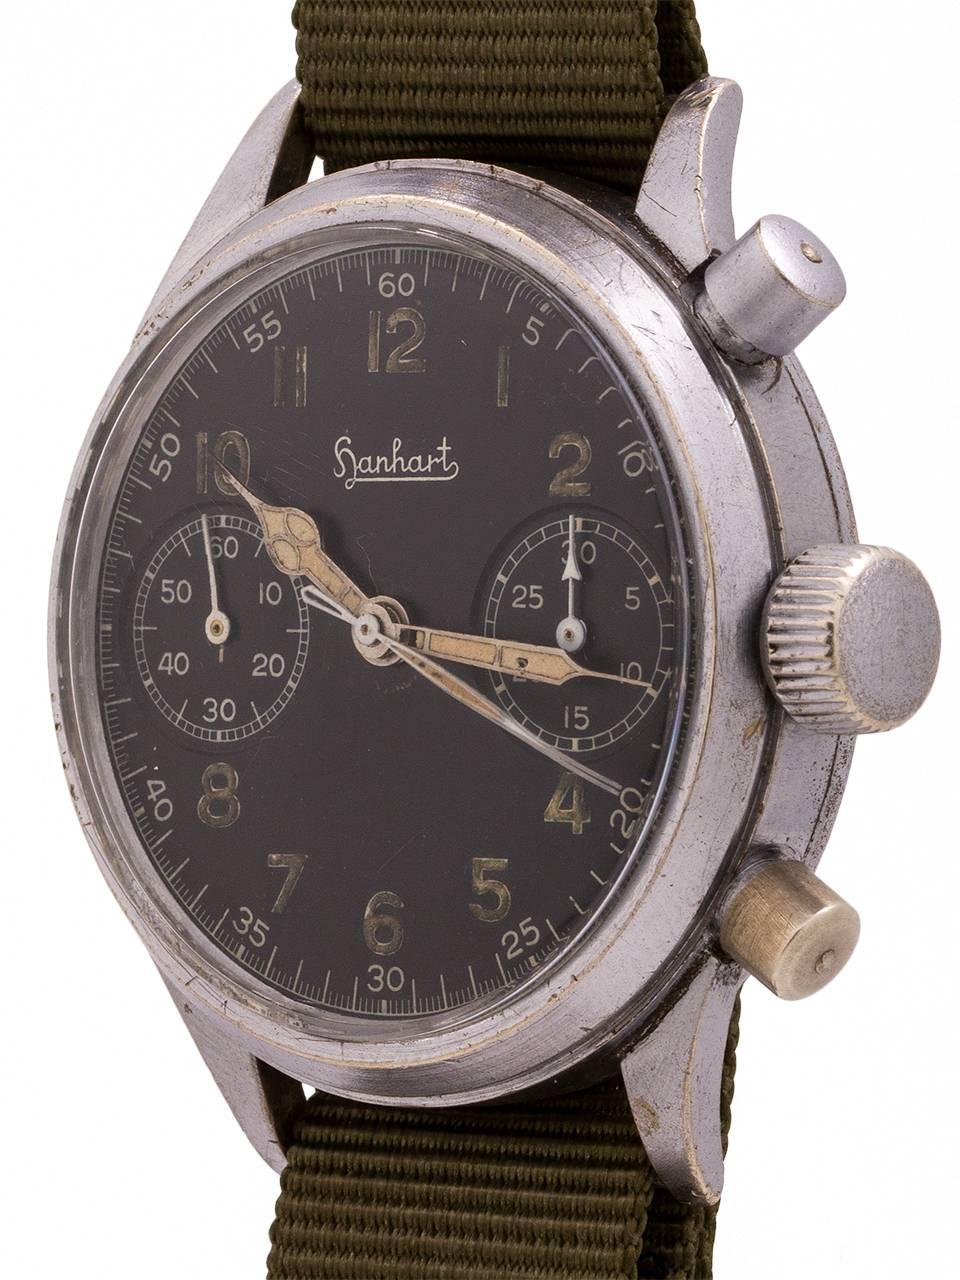 
World War II era Hanhart flyback chronograph. These watches were worn mainly by the German Luftwaffe pilots. The base metal case is a large 41mm’s, with large crown and pump pushers. This watch also features the fixed bezel, in contrast with the